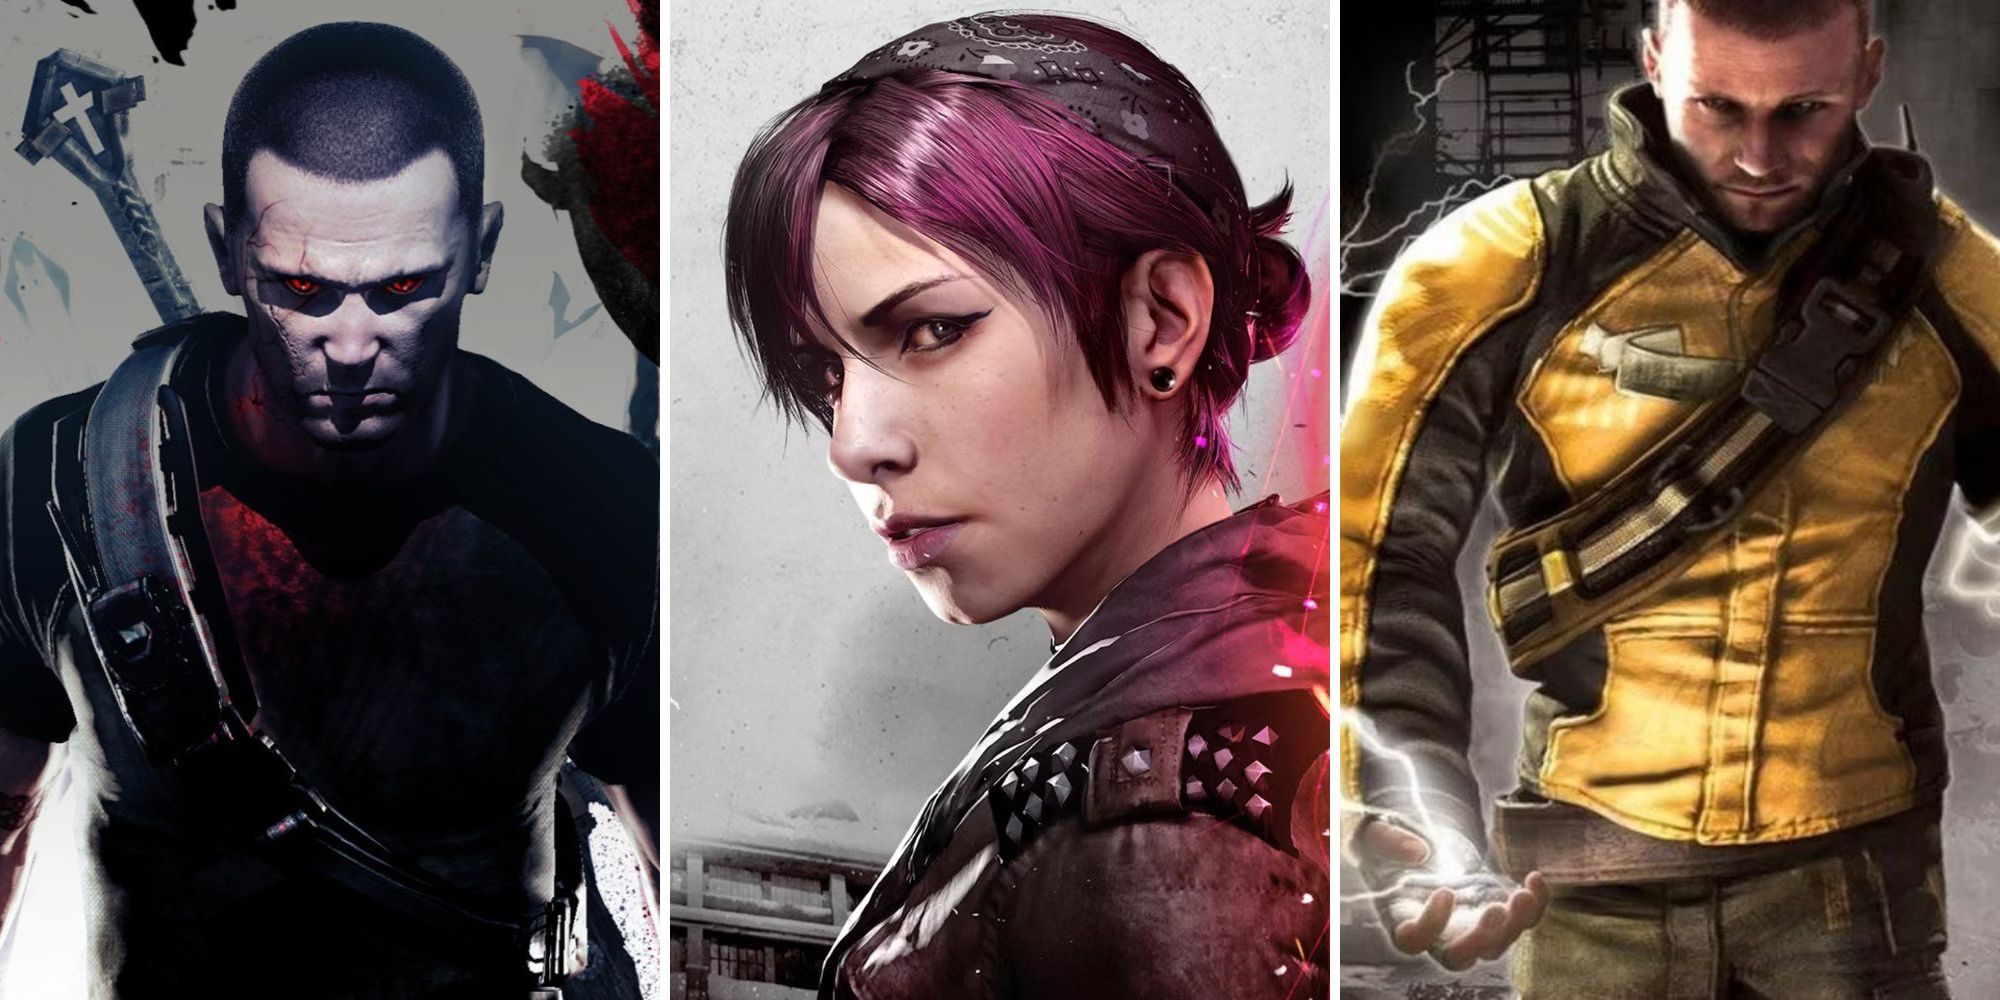 A grid showing Fetch from Infamous: New Light, and Cole from both Infamous: Festival of Blood, and the original Infamous game